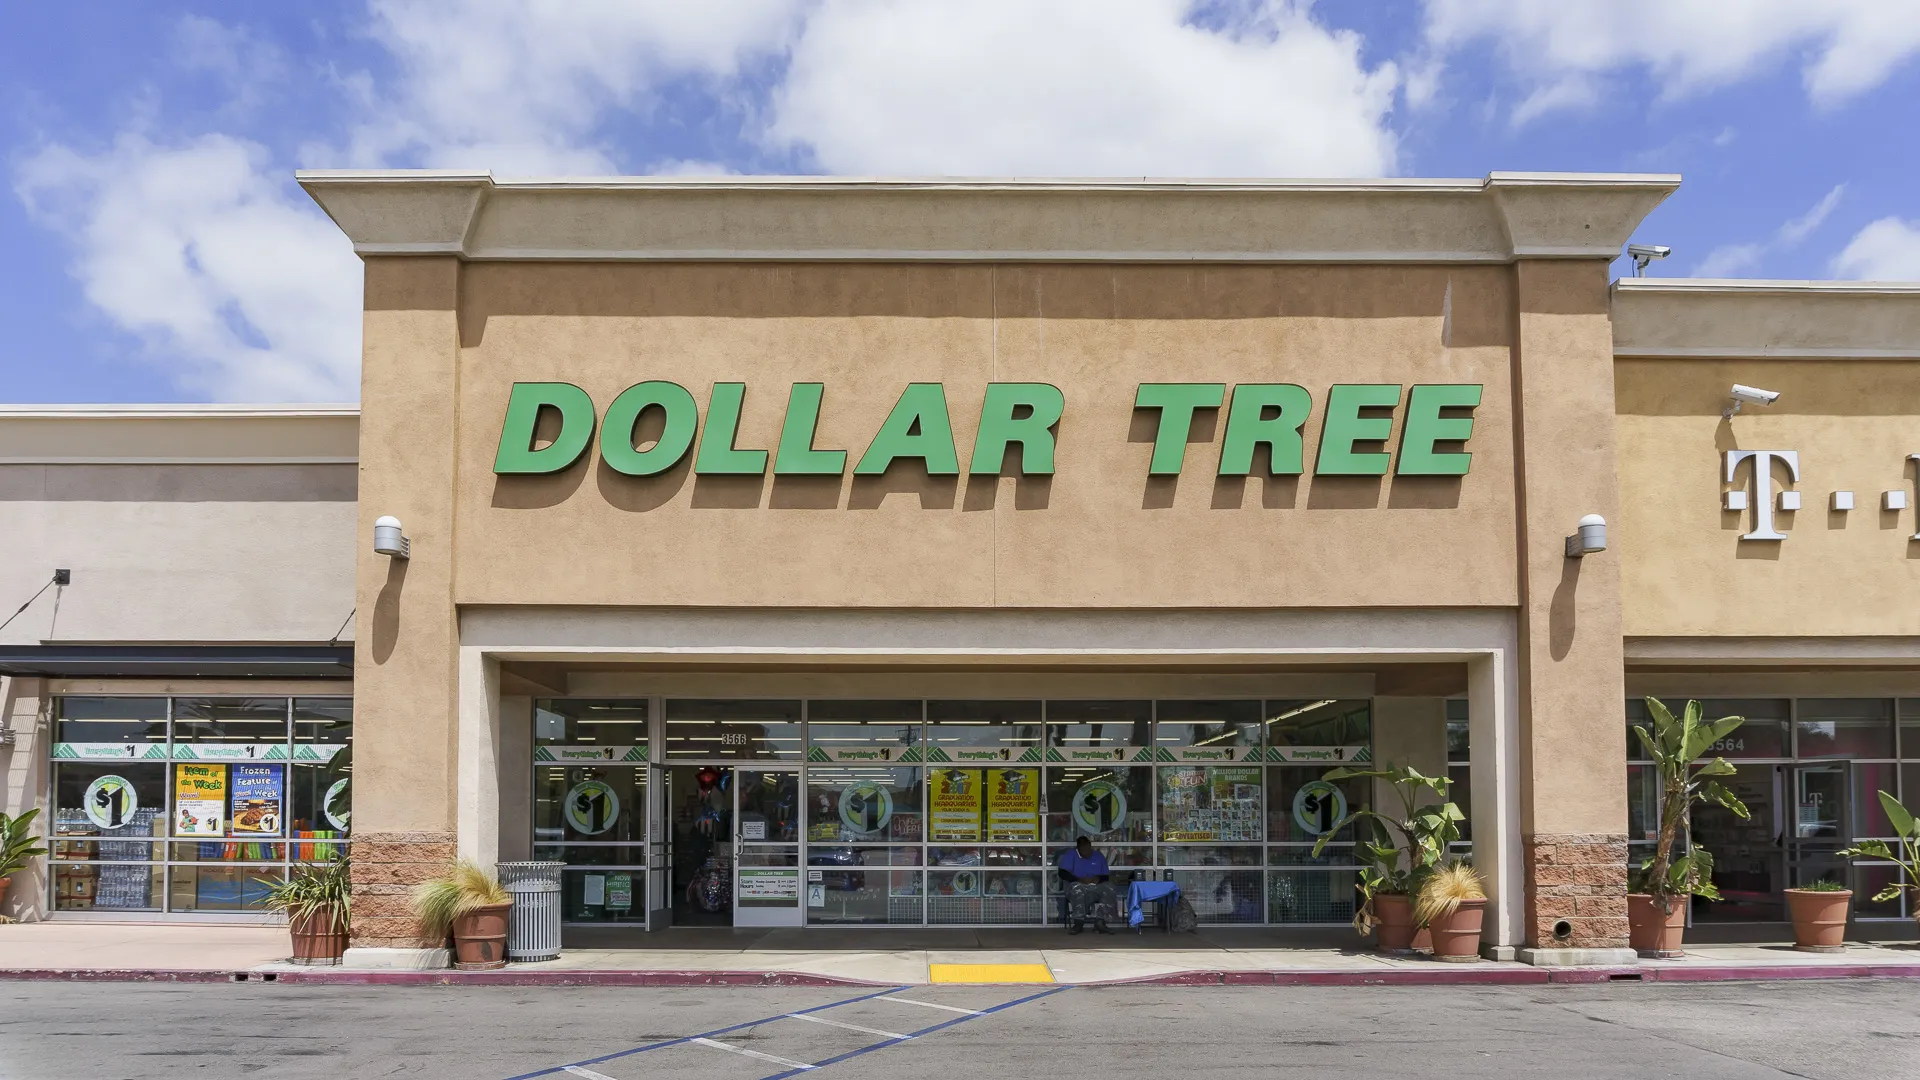 19 Best Dollar Tree Grocery Items To Buy in April | GOBankingRates